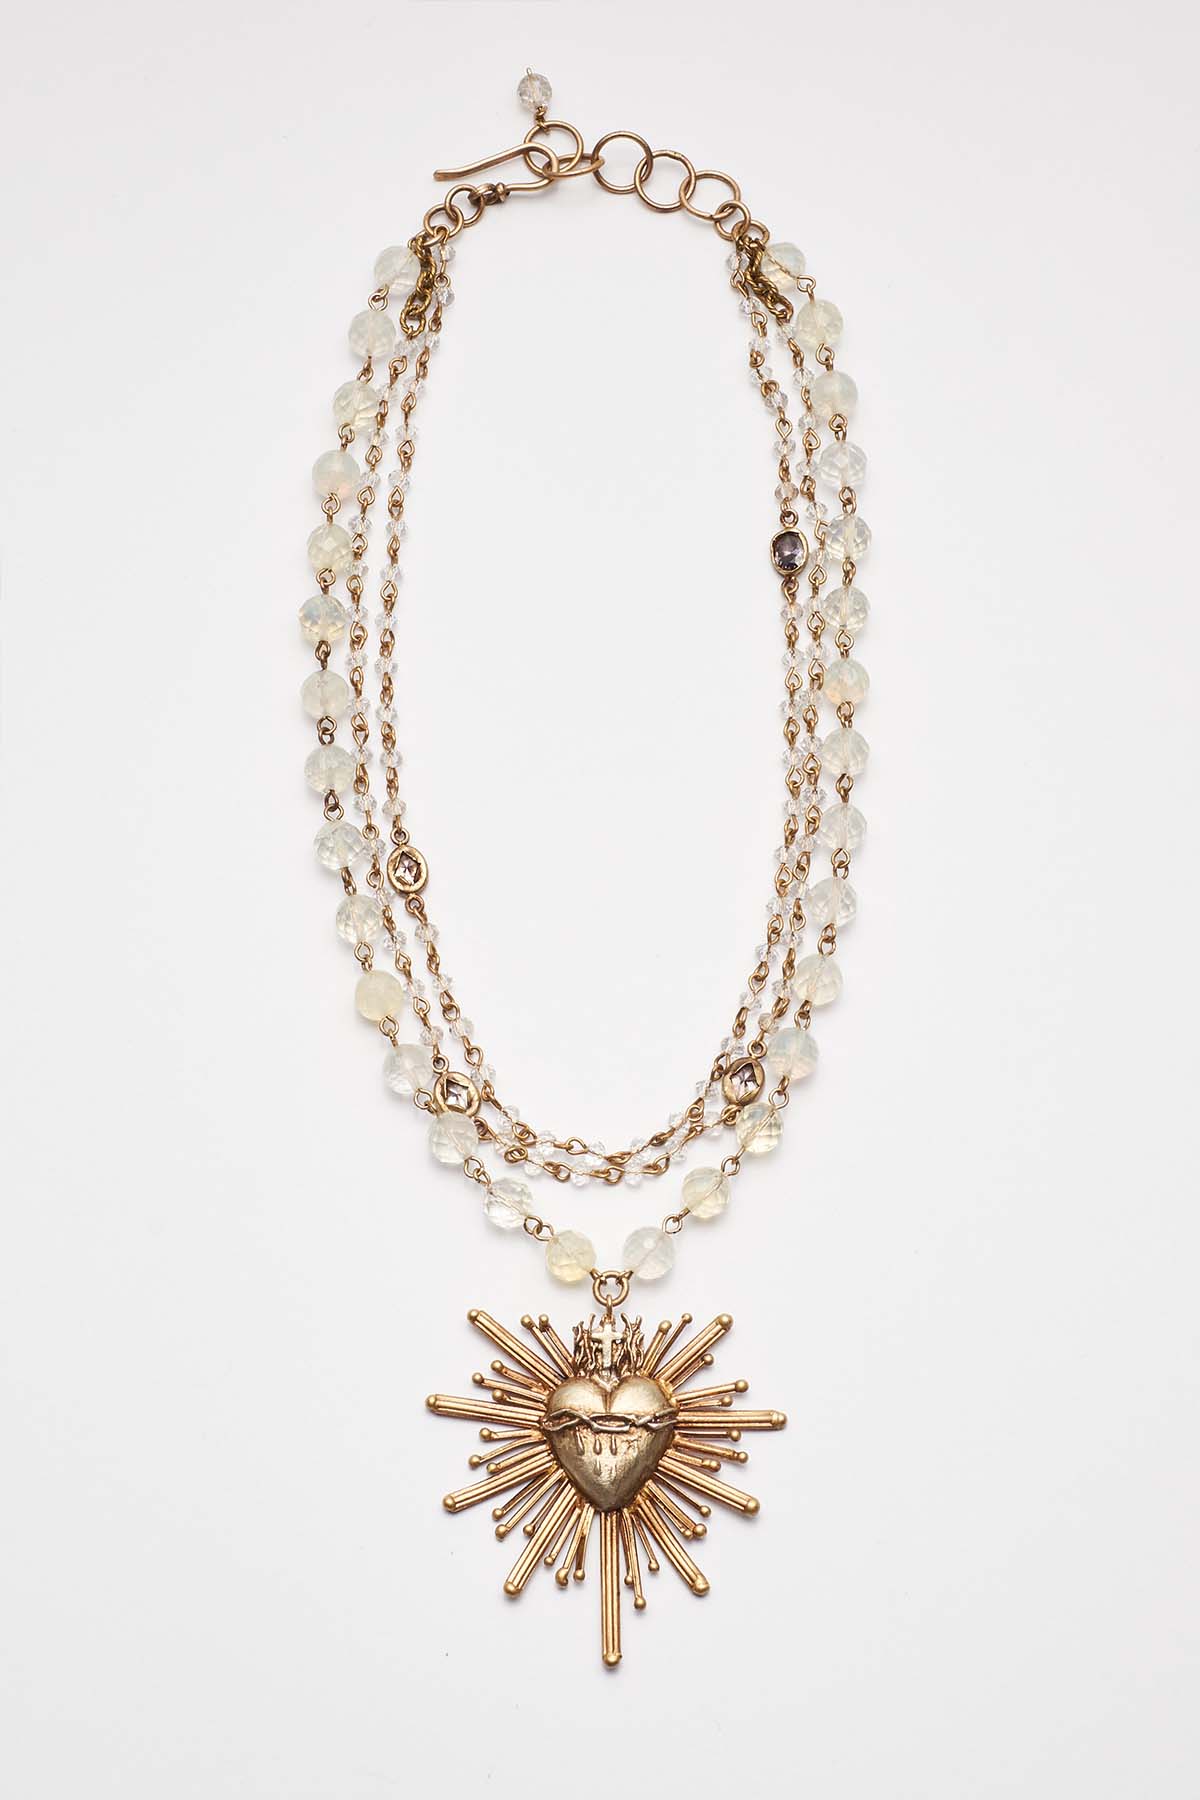 CORAZON SAGRADO NECKLACE WITH CRYSTALS, BEADS AND BRONZE